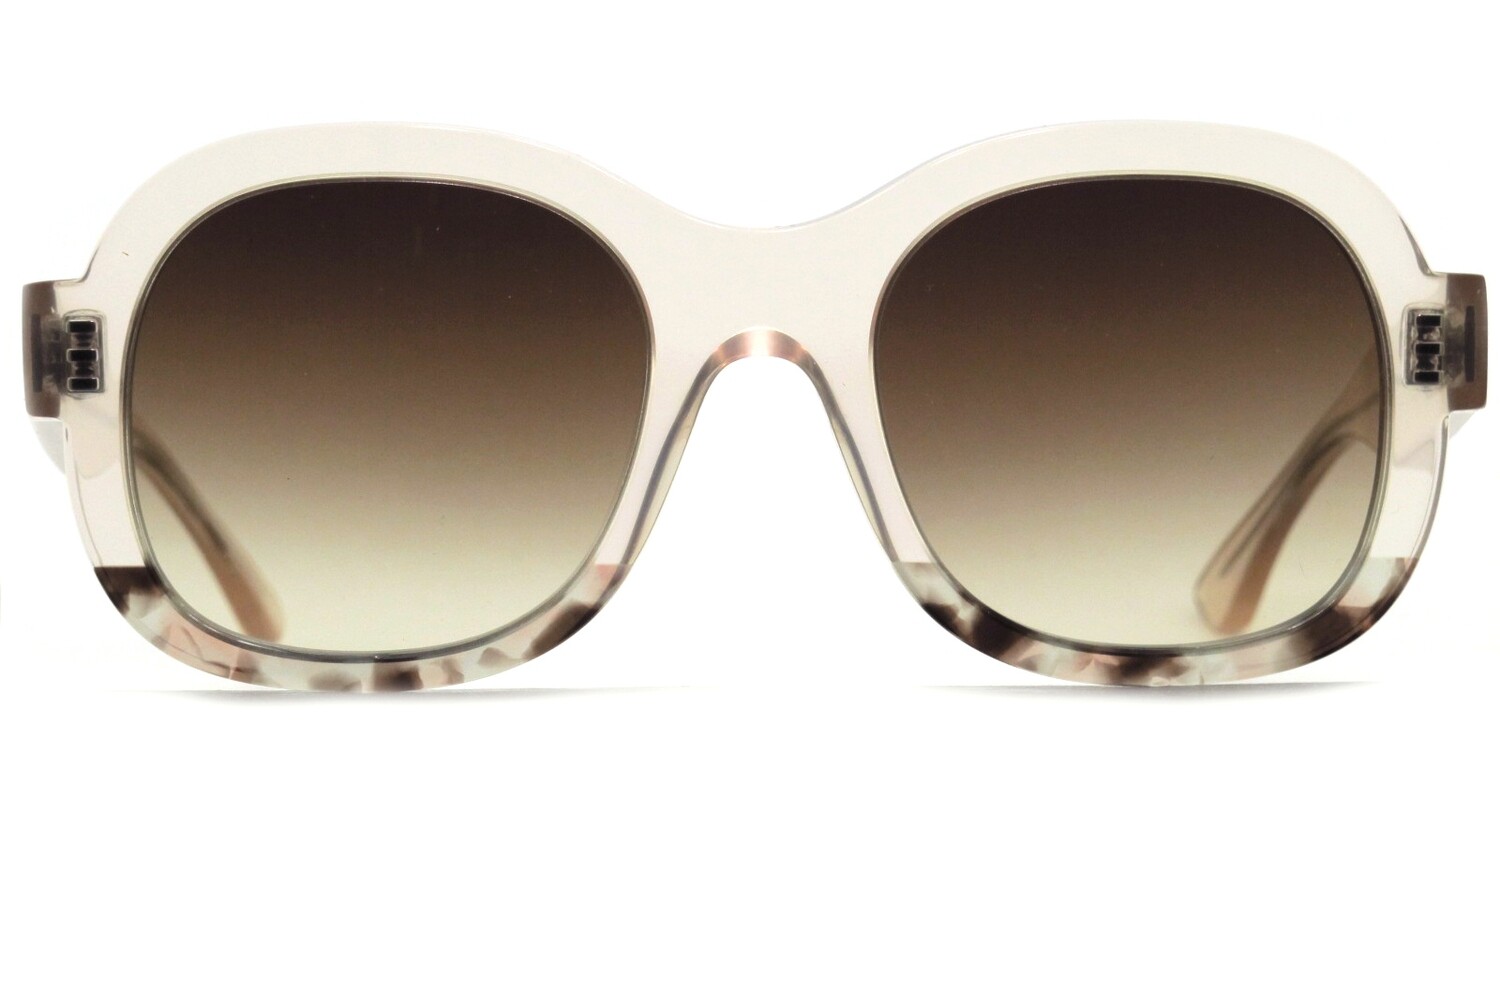 Daydreamy by Thierry Lasry